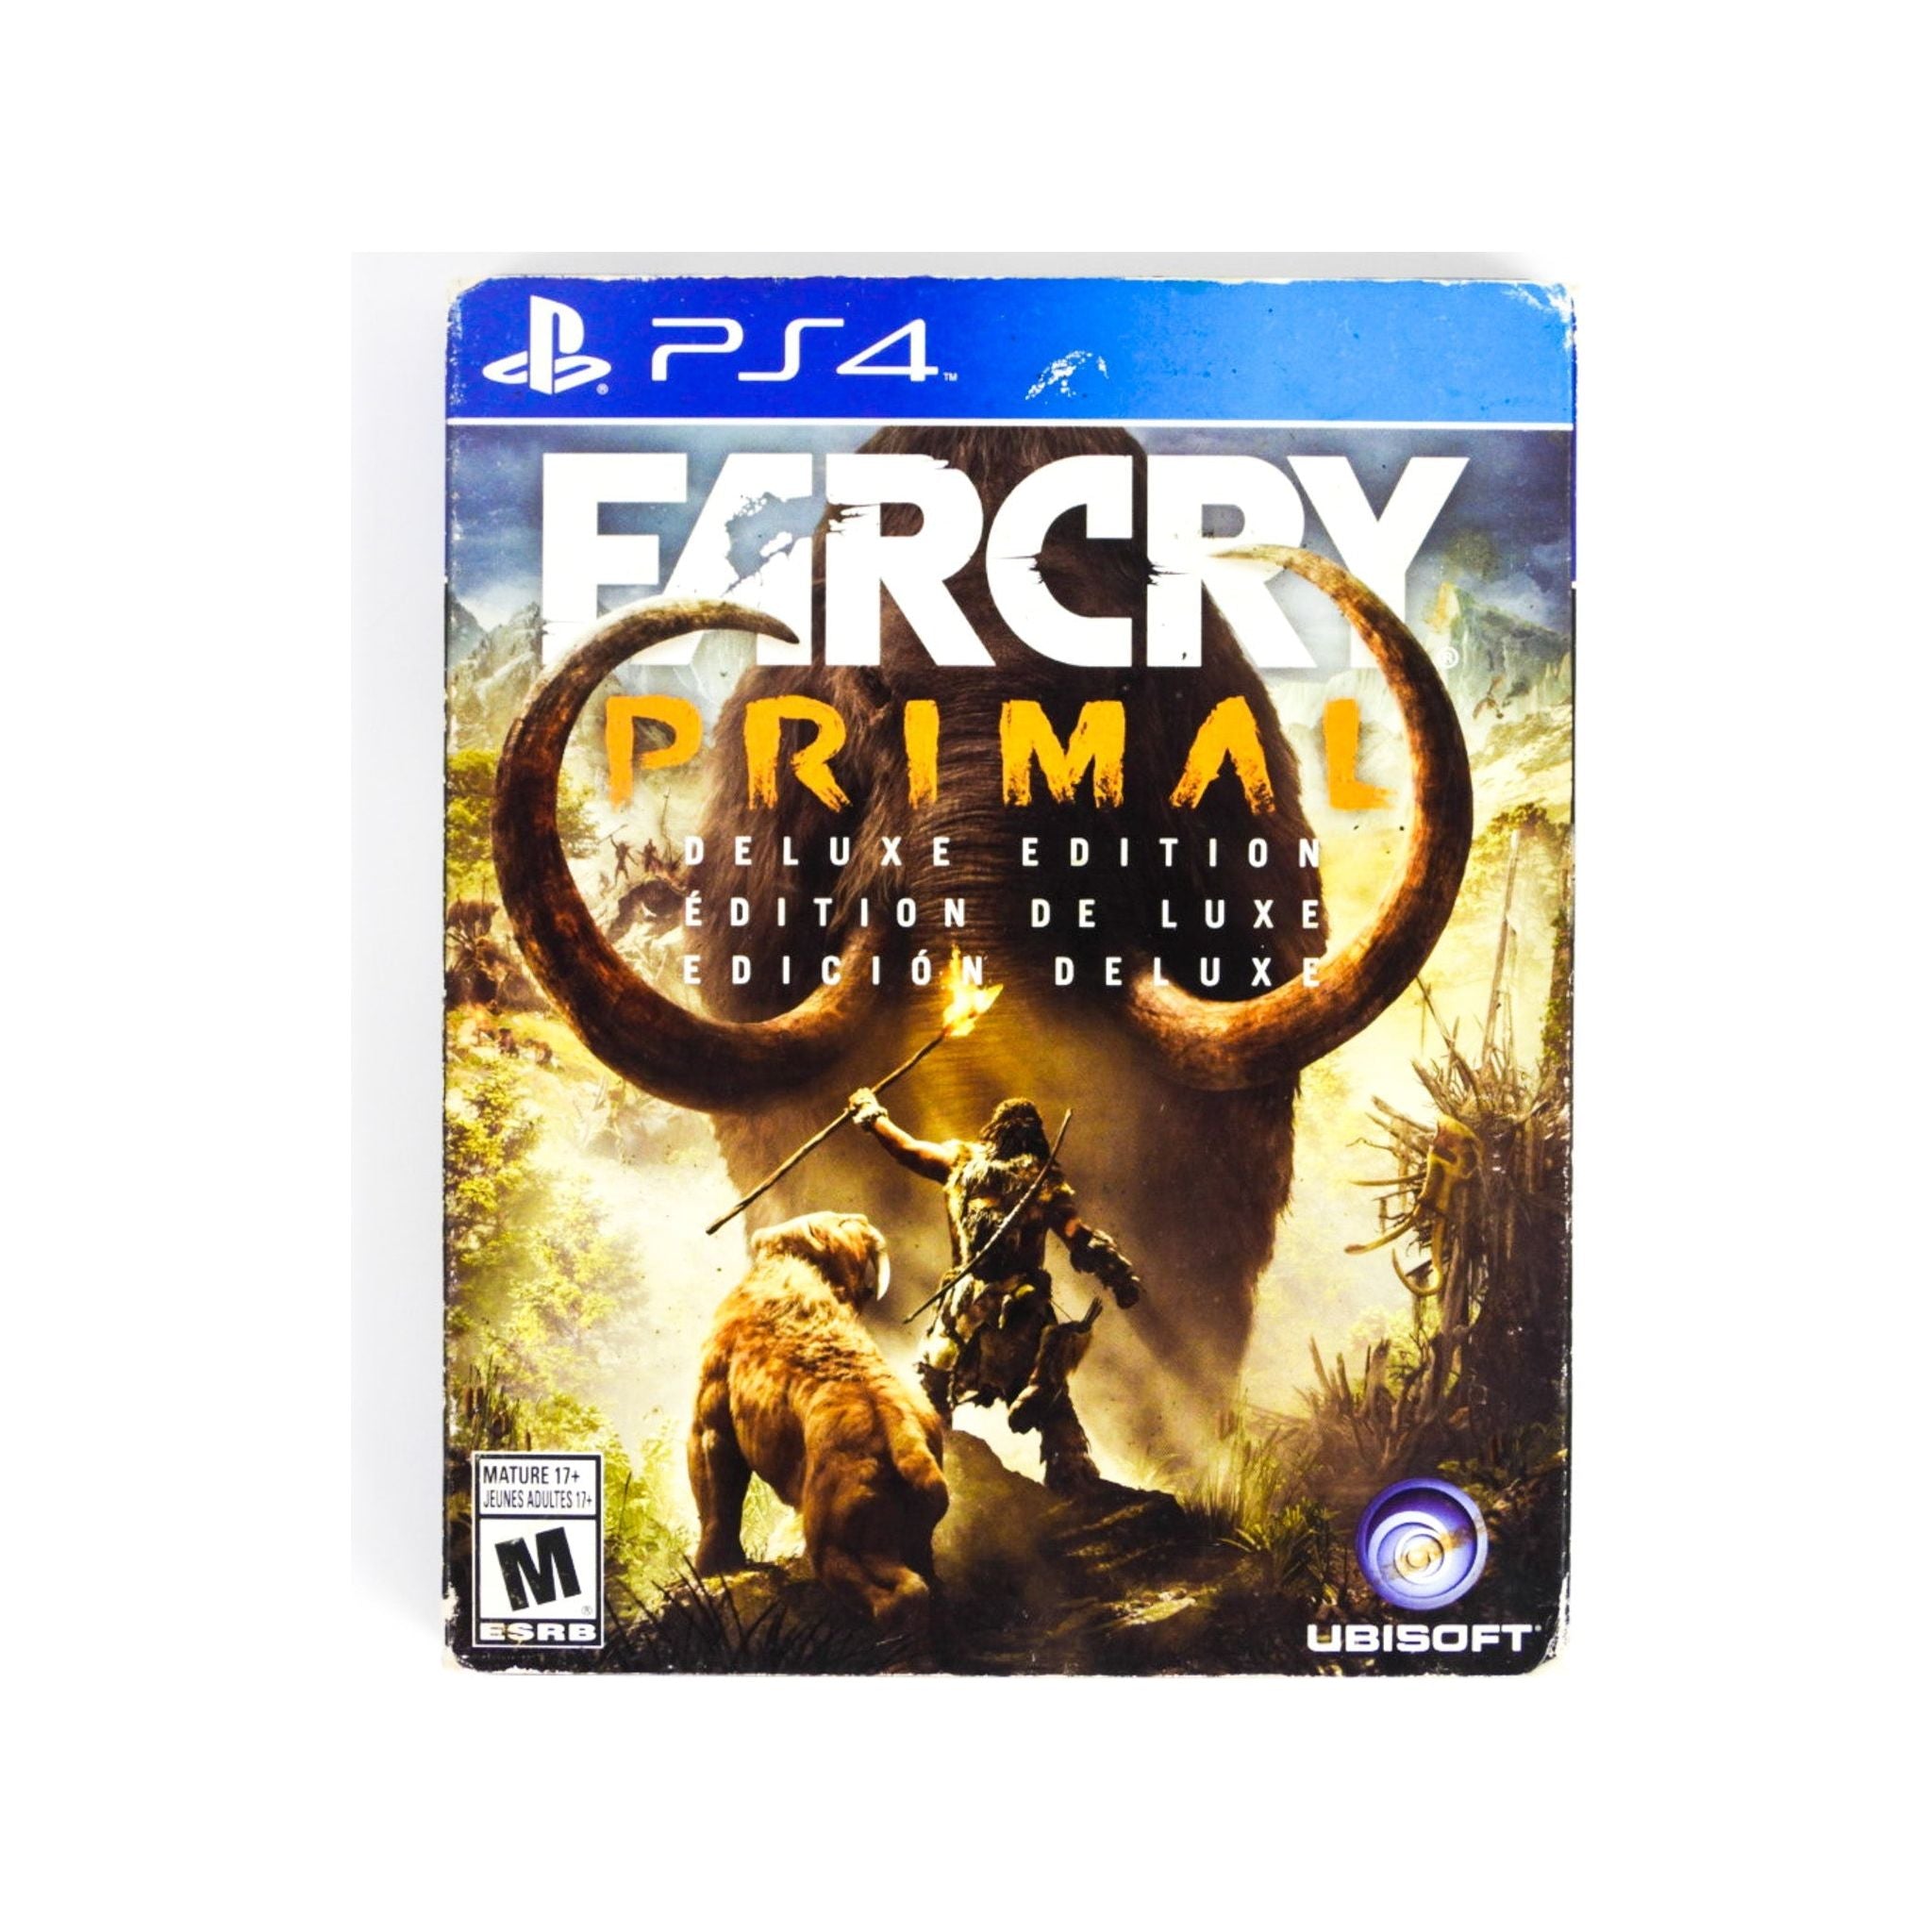 PS4 - Far Cry Primal Deluxe Edition